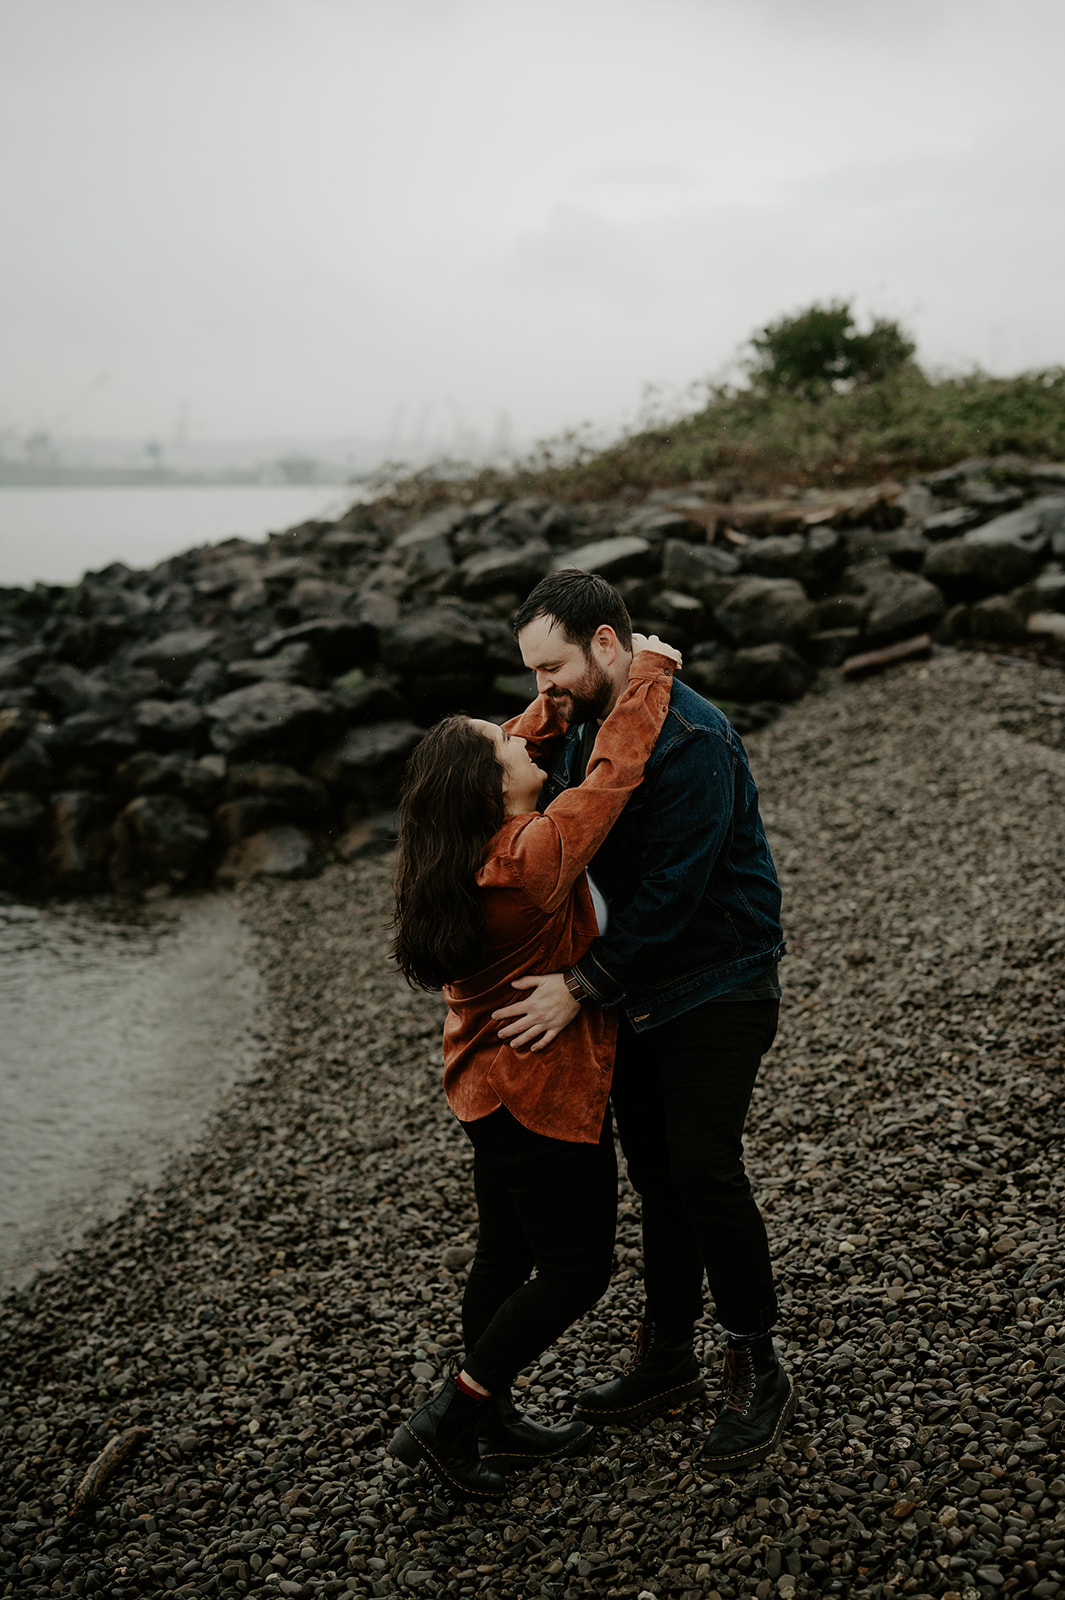 a couple embraces at the beach on a rainy day